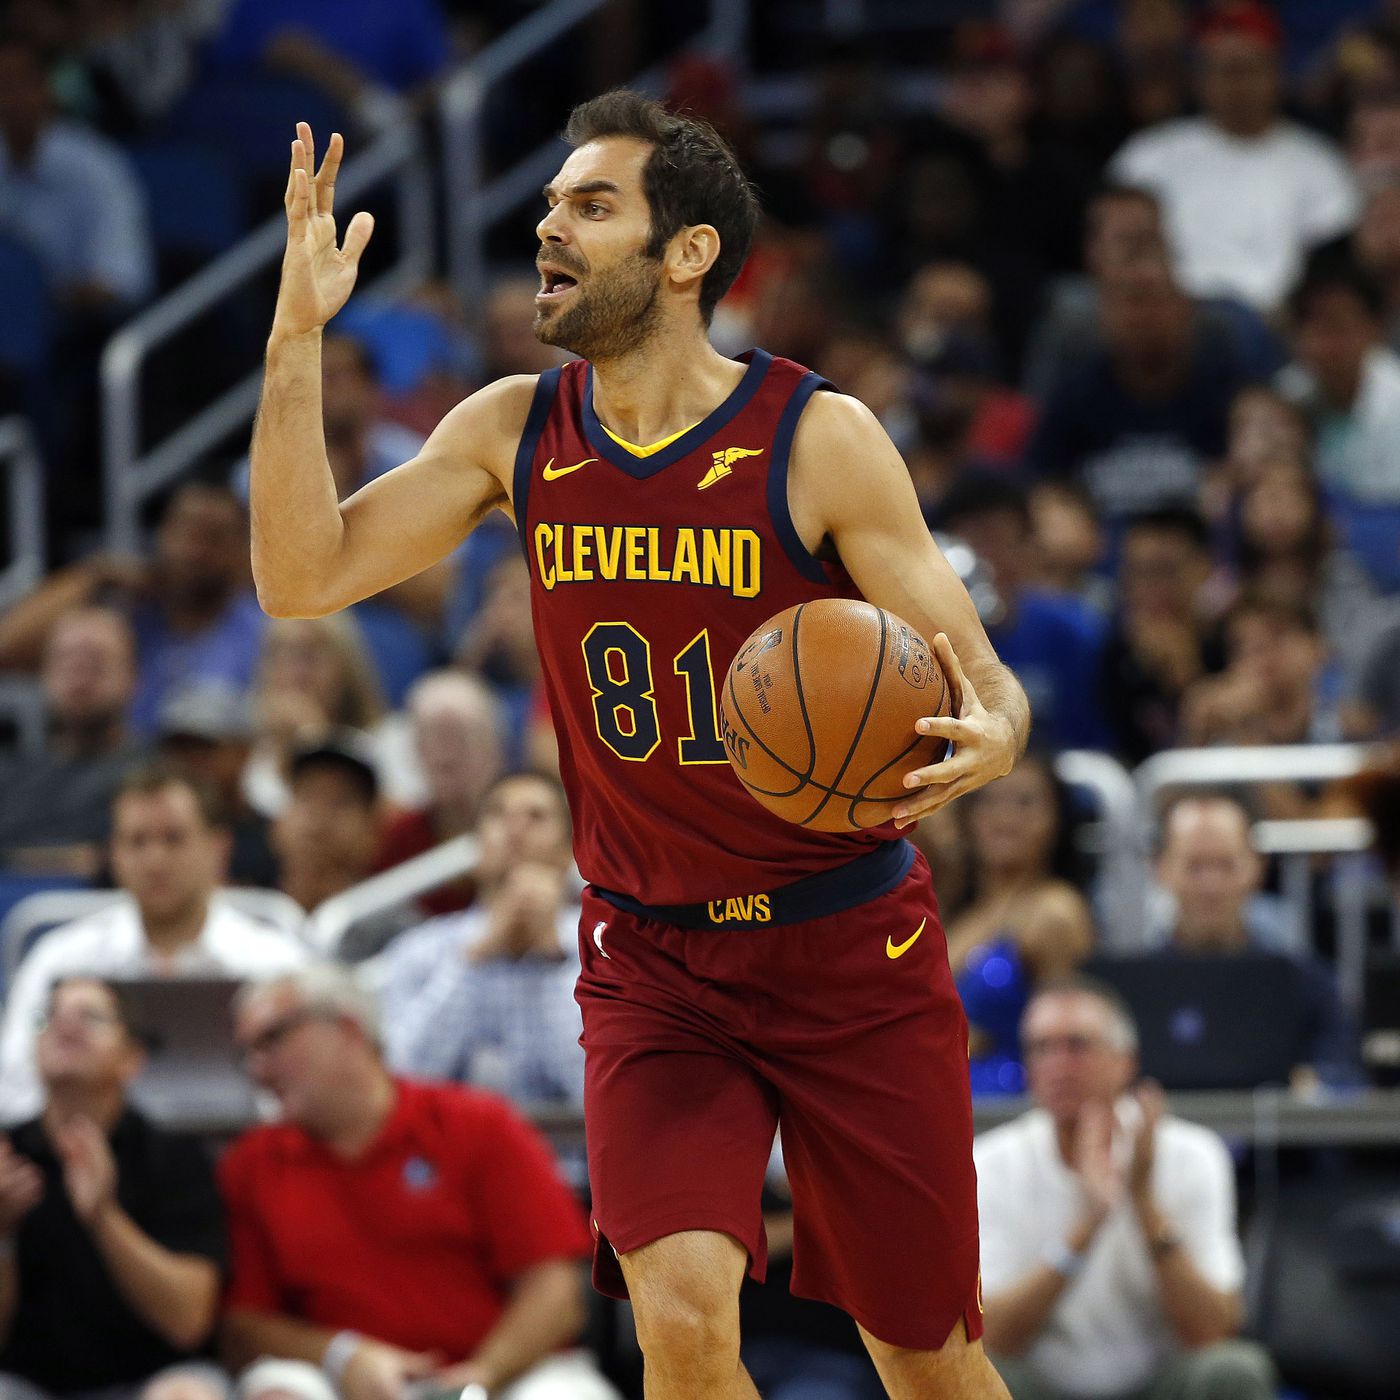 Jose Calderon in the Cleveland Cavaliers jersey (Source: Basketball Forever)